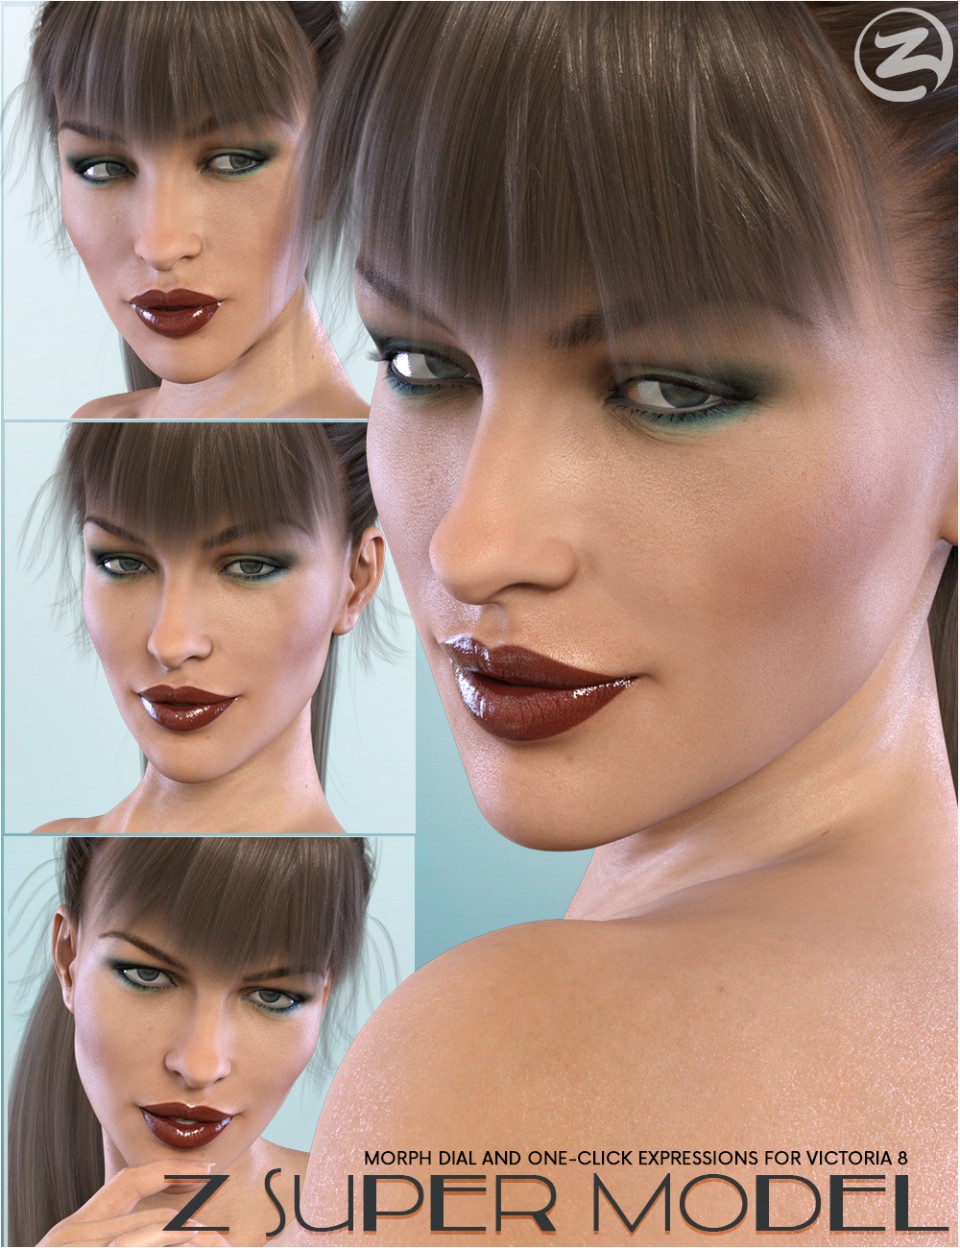 Z Super Model – Dialable and One-Click Expressions for Victoria 8_DAZ3D下载站